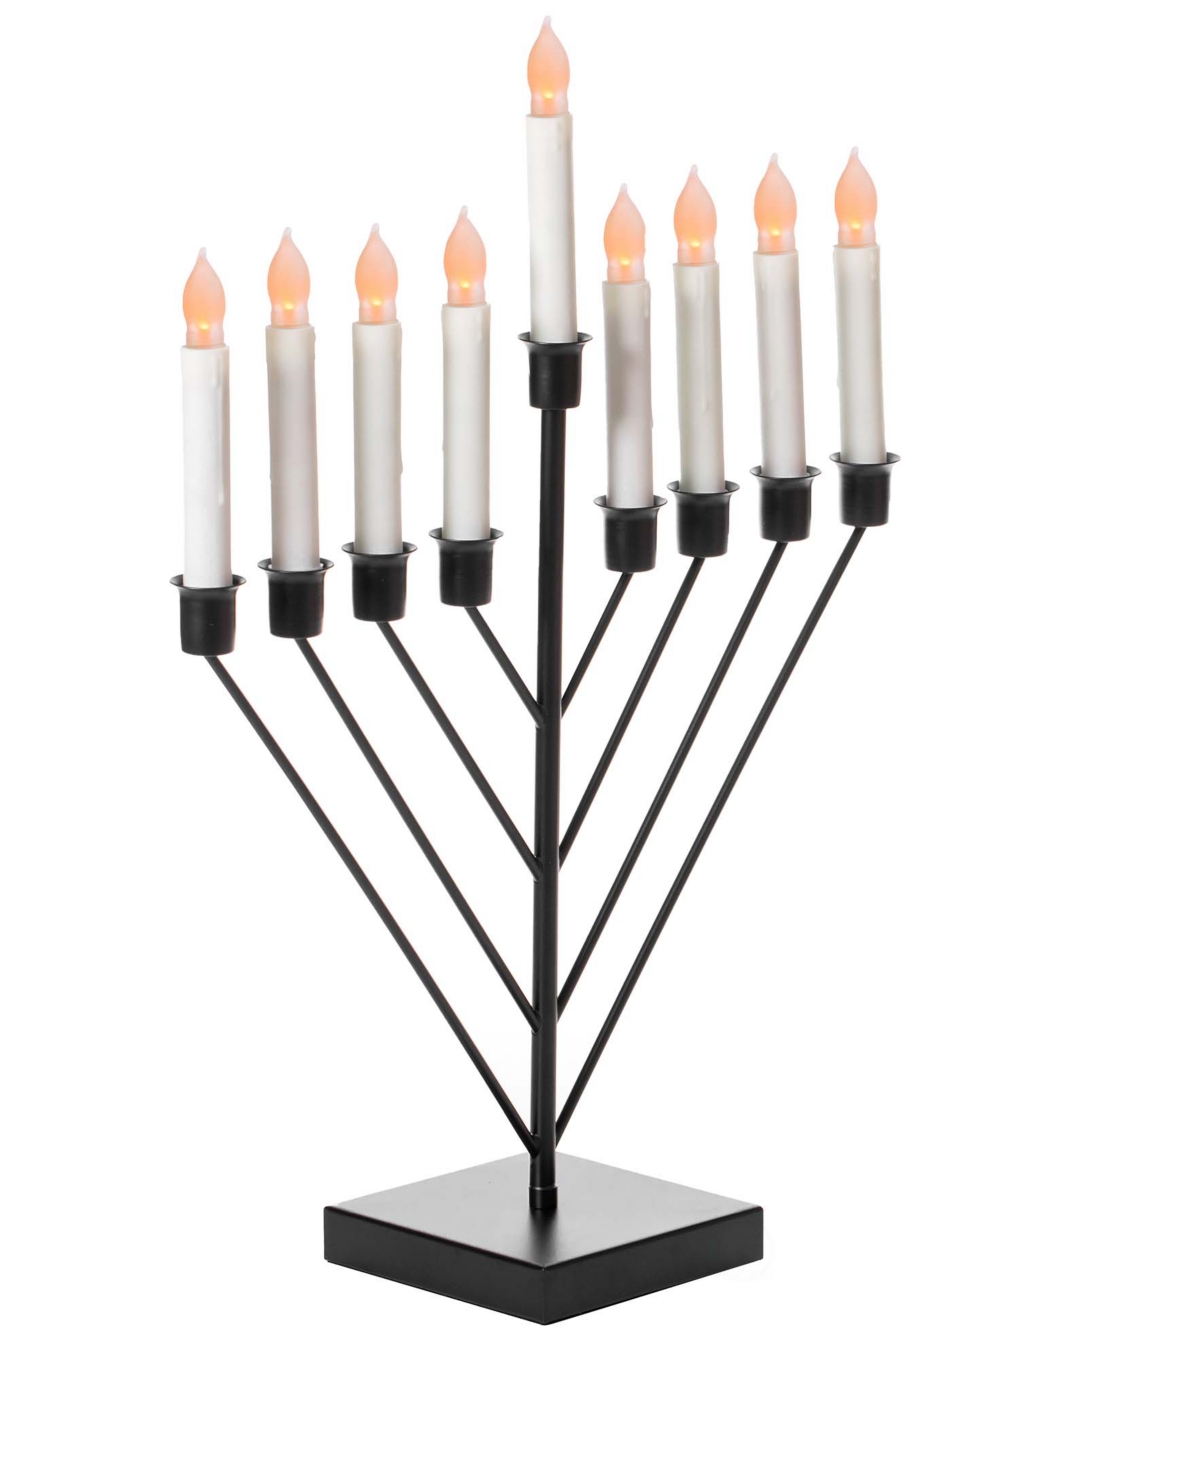 9 Branch Electric Chabad Judaic Chanukah Menorah with Led Candle Design Candlestick - Black